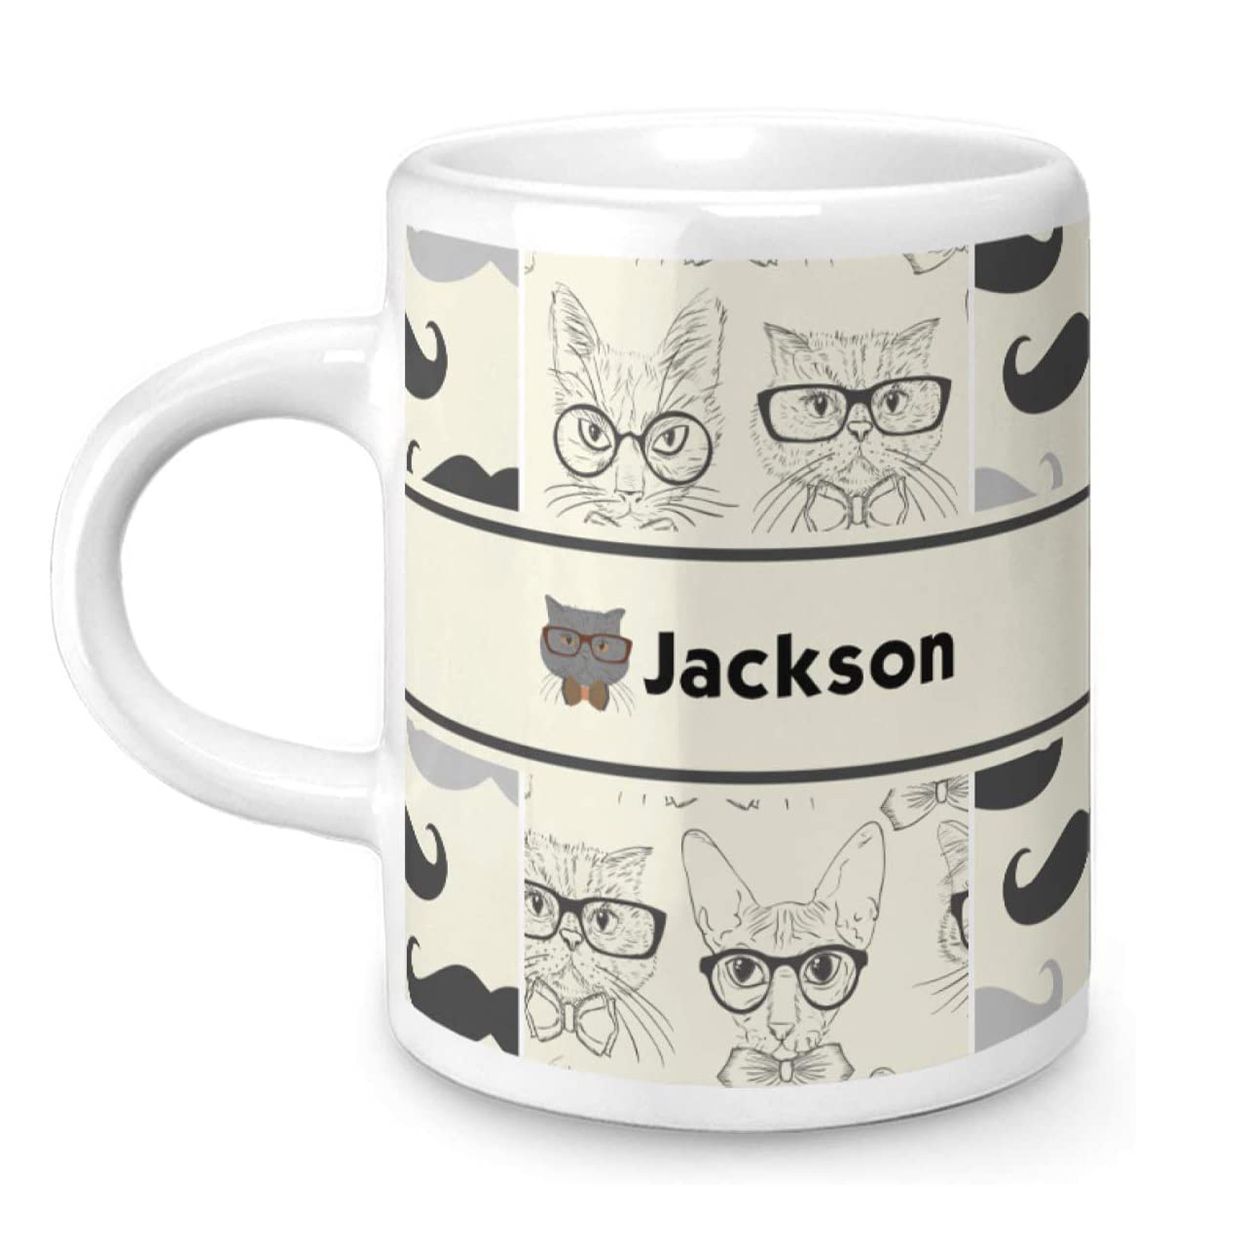 A Mug To Keep Funny Coffee Mug inspiration Cat Kiss This Gift For Cat Lovers 